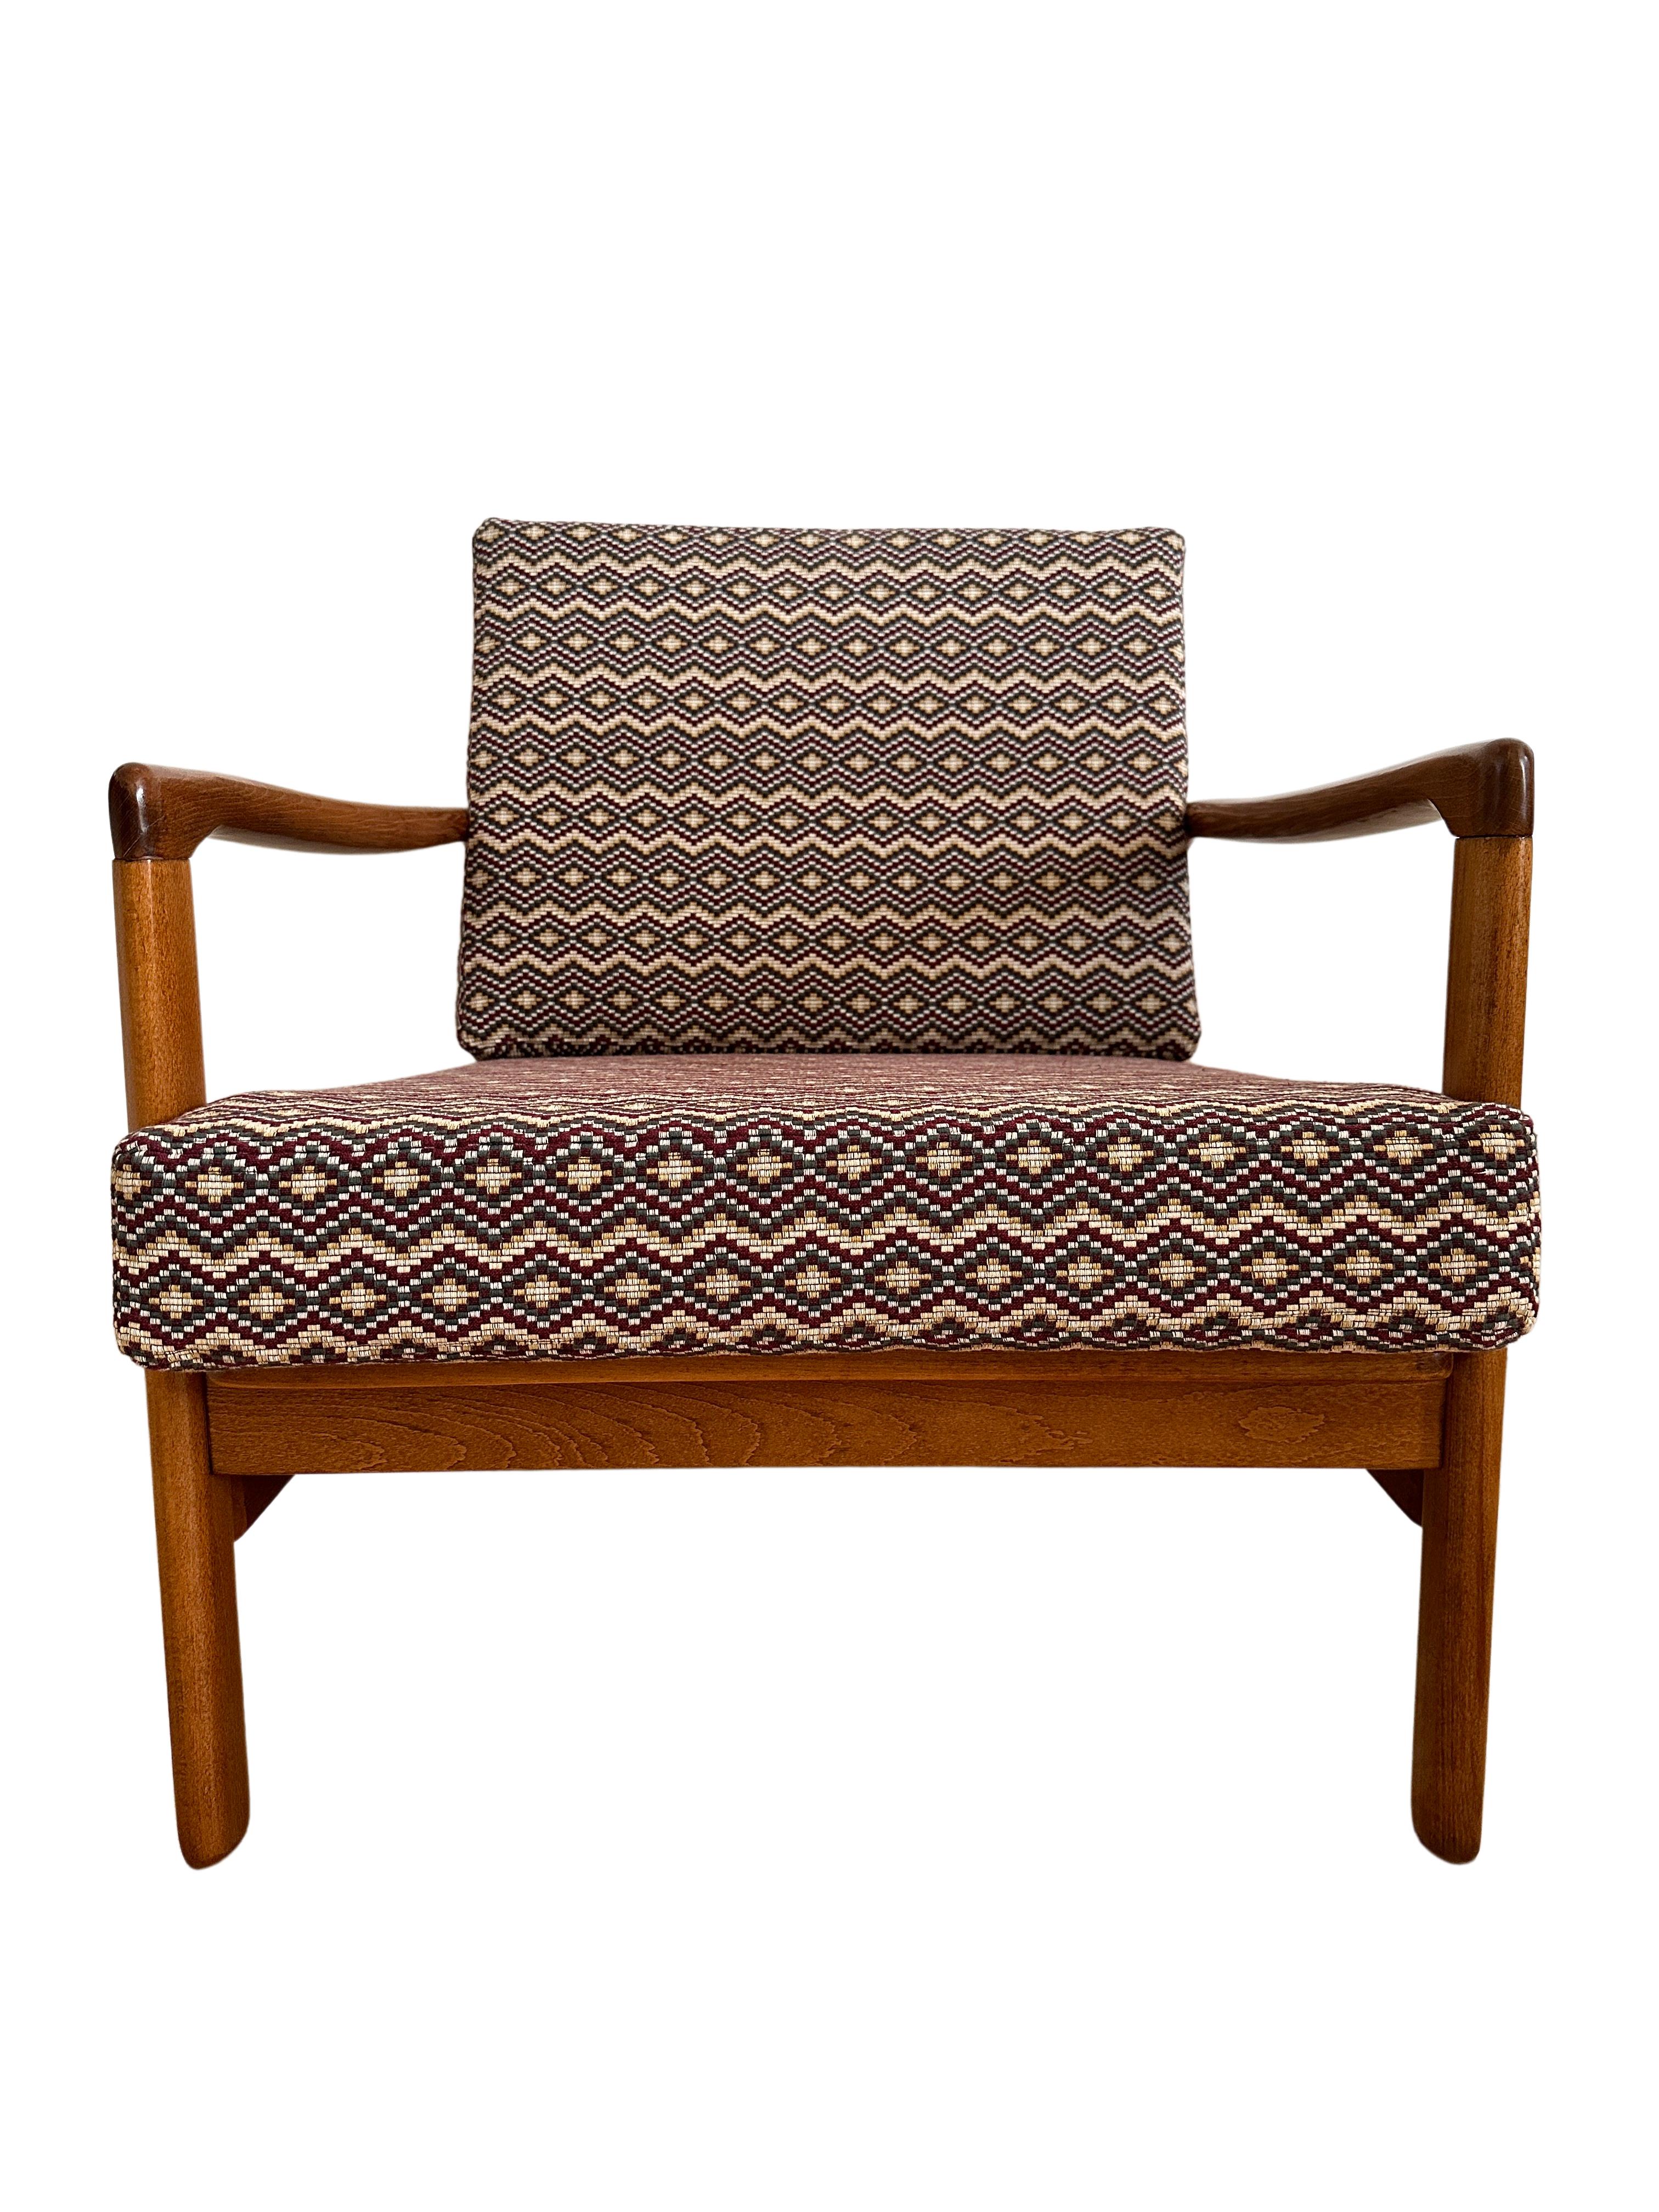 Mid-Century Modern Midcentury Armchair, in Geometric and Ethnic Fabric, Europe, 1960s For Sale